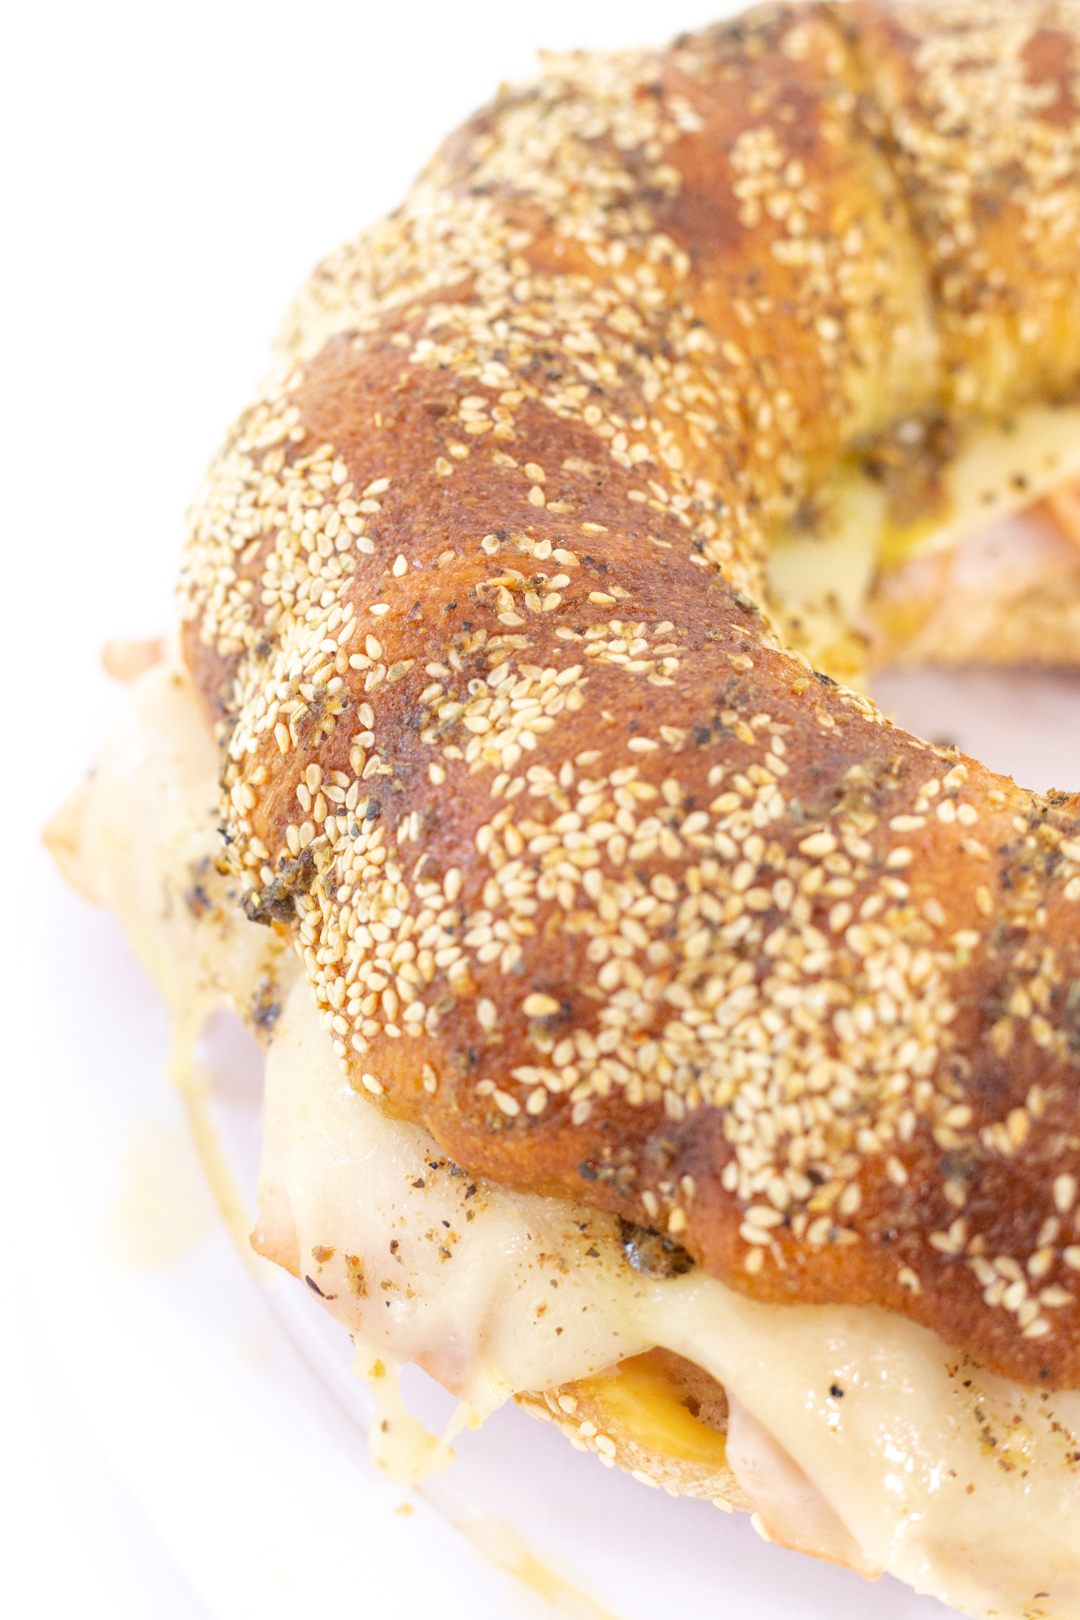 giant party sandwich up close with sesame seeds and italian seasonings